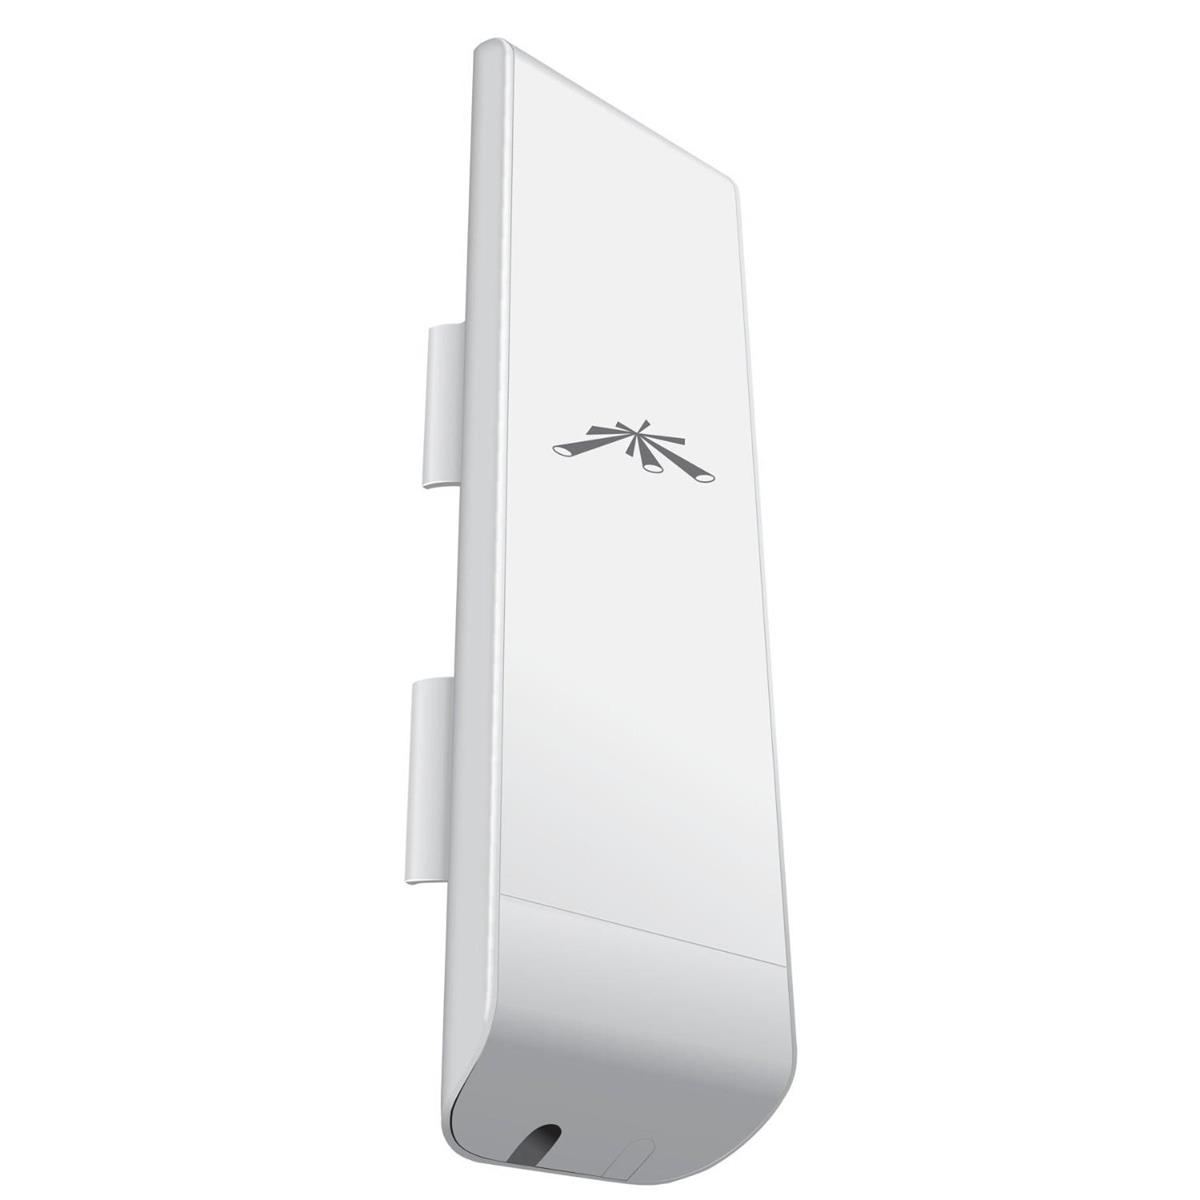 Image of Ubiquiti Networks NanoStation5 Broadband Outdoor Wireless CPE Router